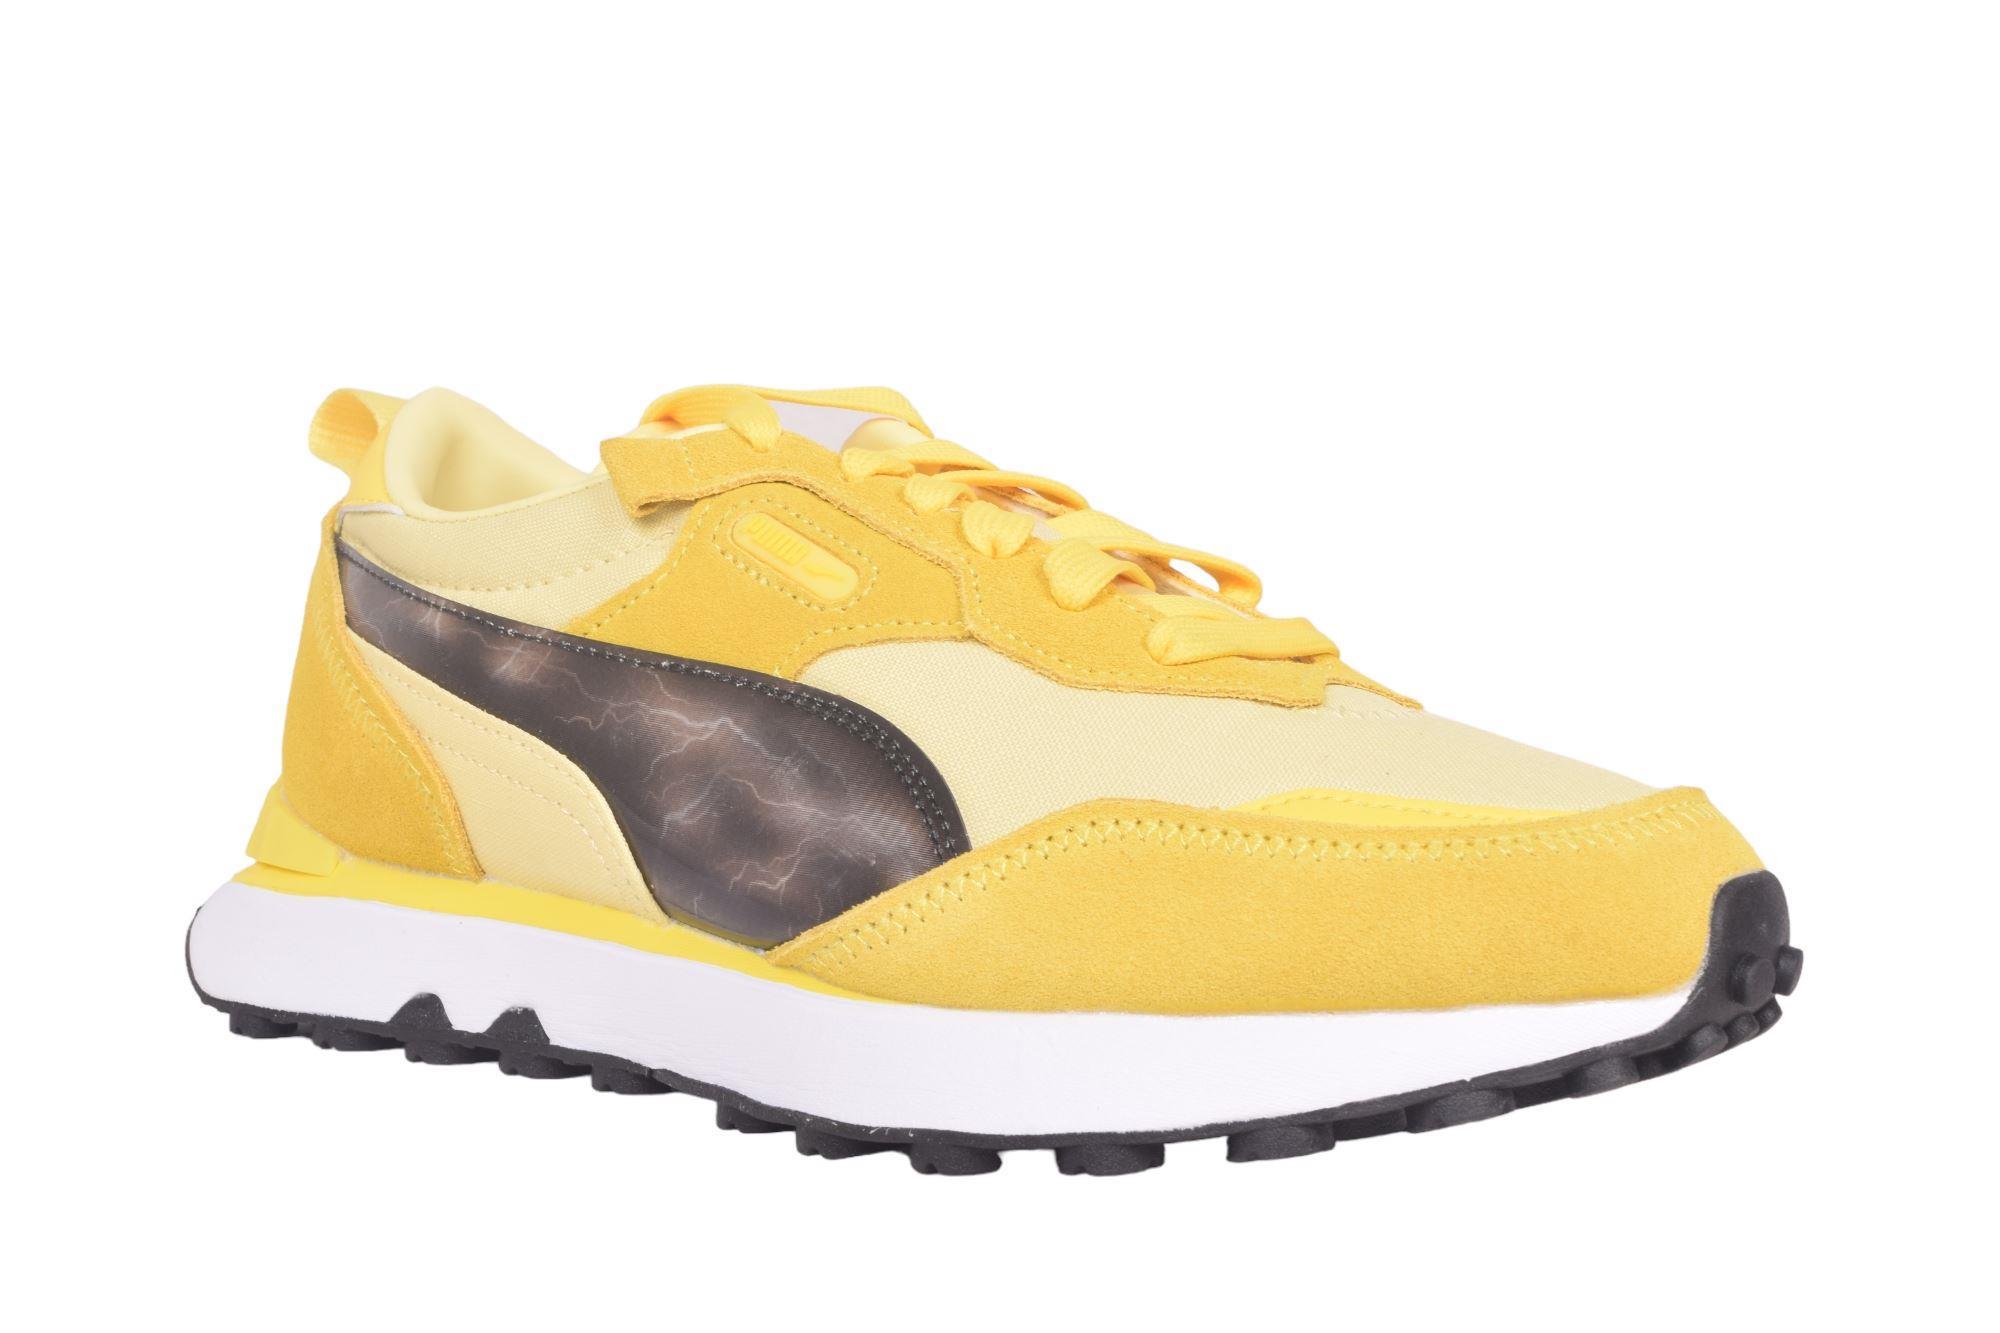 Puma YELLOW SNEAKERS ::PARMAR BOOT HOUSE | Buy Footwear and 